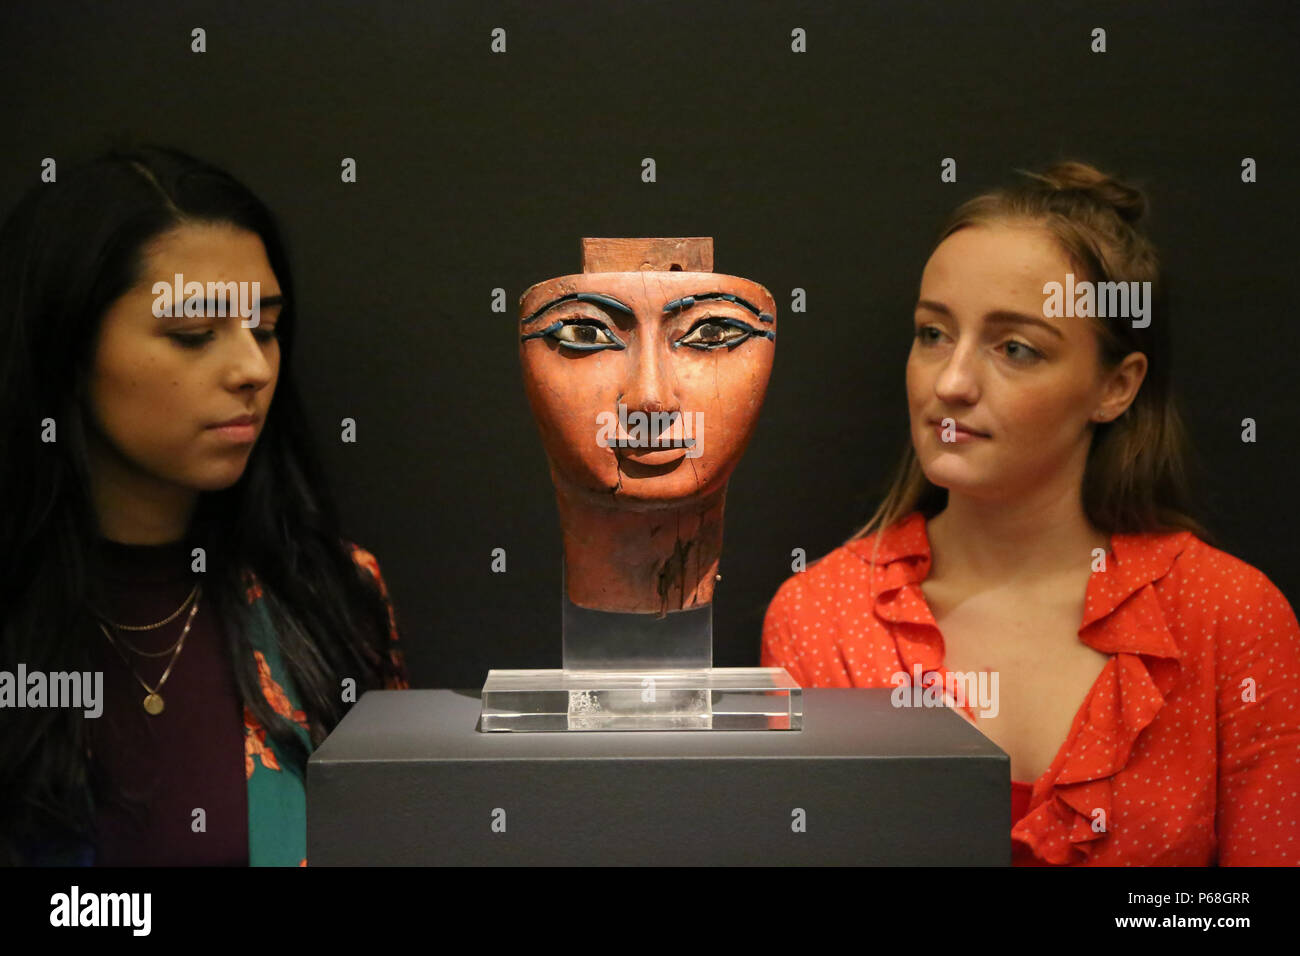 Sotheby's London. UK 29 June 2018 - Two women looks at Ab Egyptian polychrome Wood Mummy Mask, 21st/22nd Dynasty, 1075-716 B.C (Est £100,000 - 150,000). Old master & British paintings and drawings, decorative arts, sculptures and antiquities spanning over two Millennia on auction at Sotheby's London.   Credit: Dinendra Haria/Alamy Live News Stock Photo